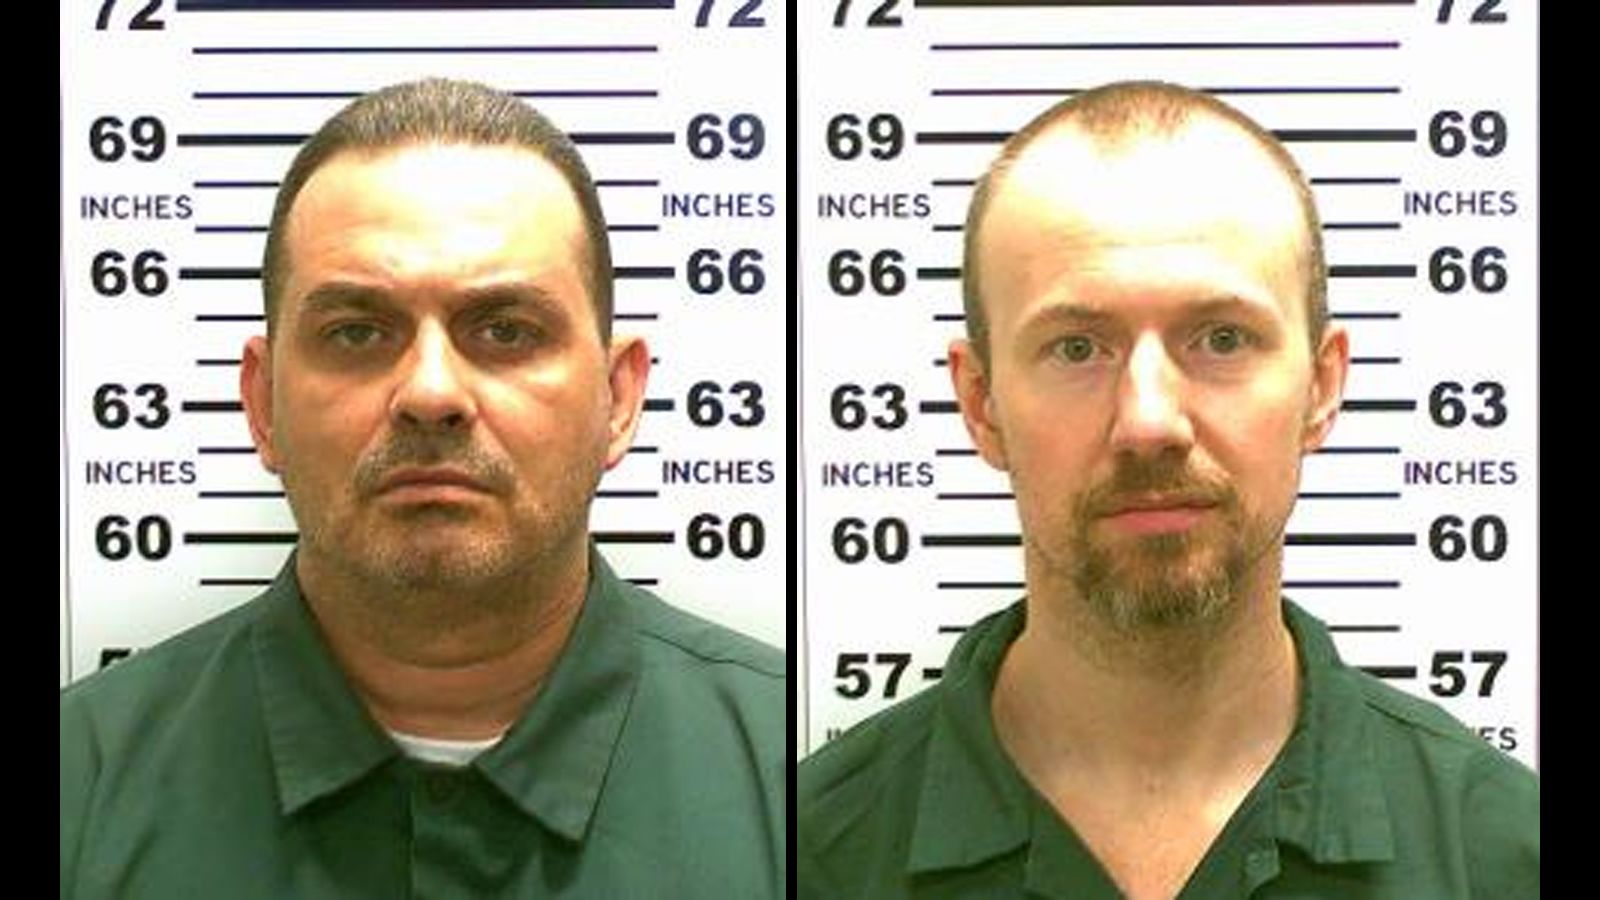 Exclusive: This Is the Route Convicts Used to Escape From New York Prison -  ABC News